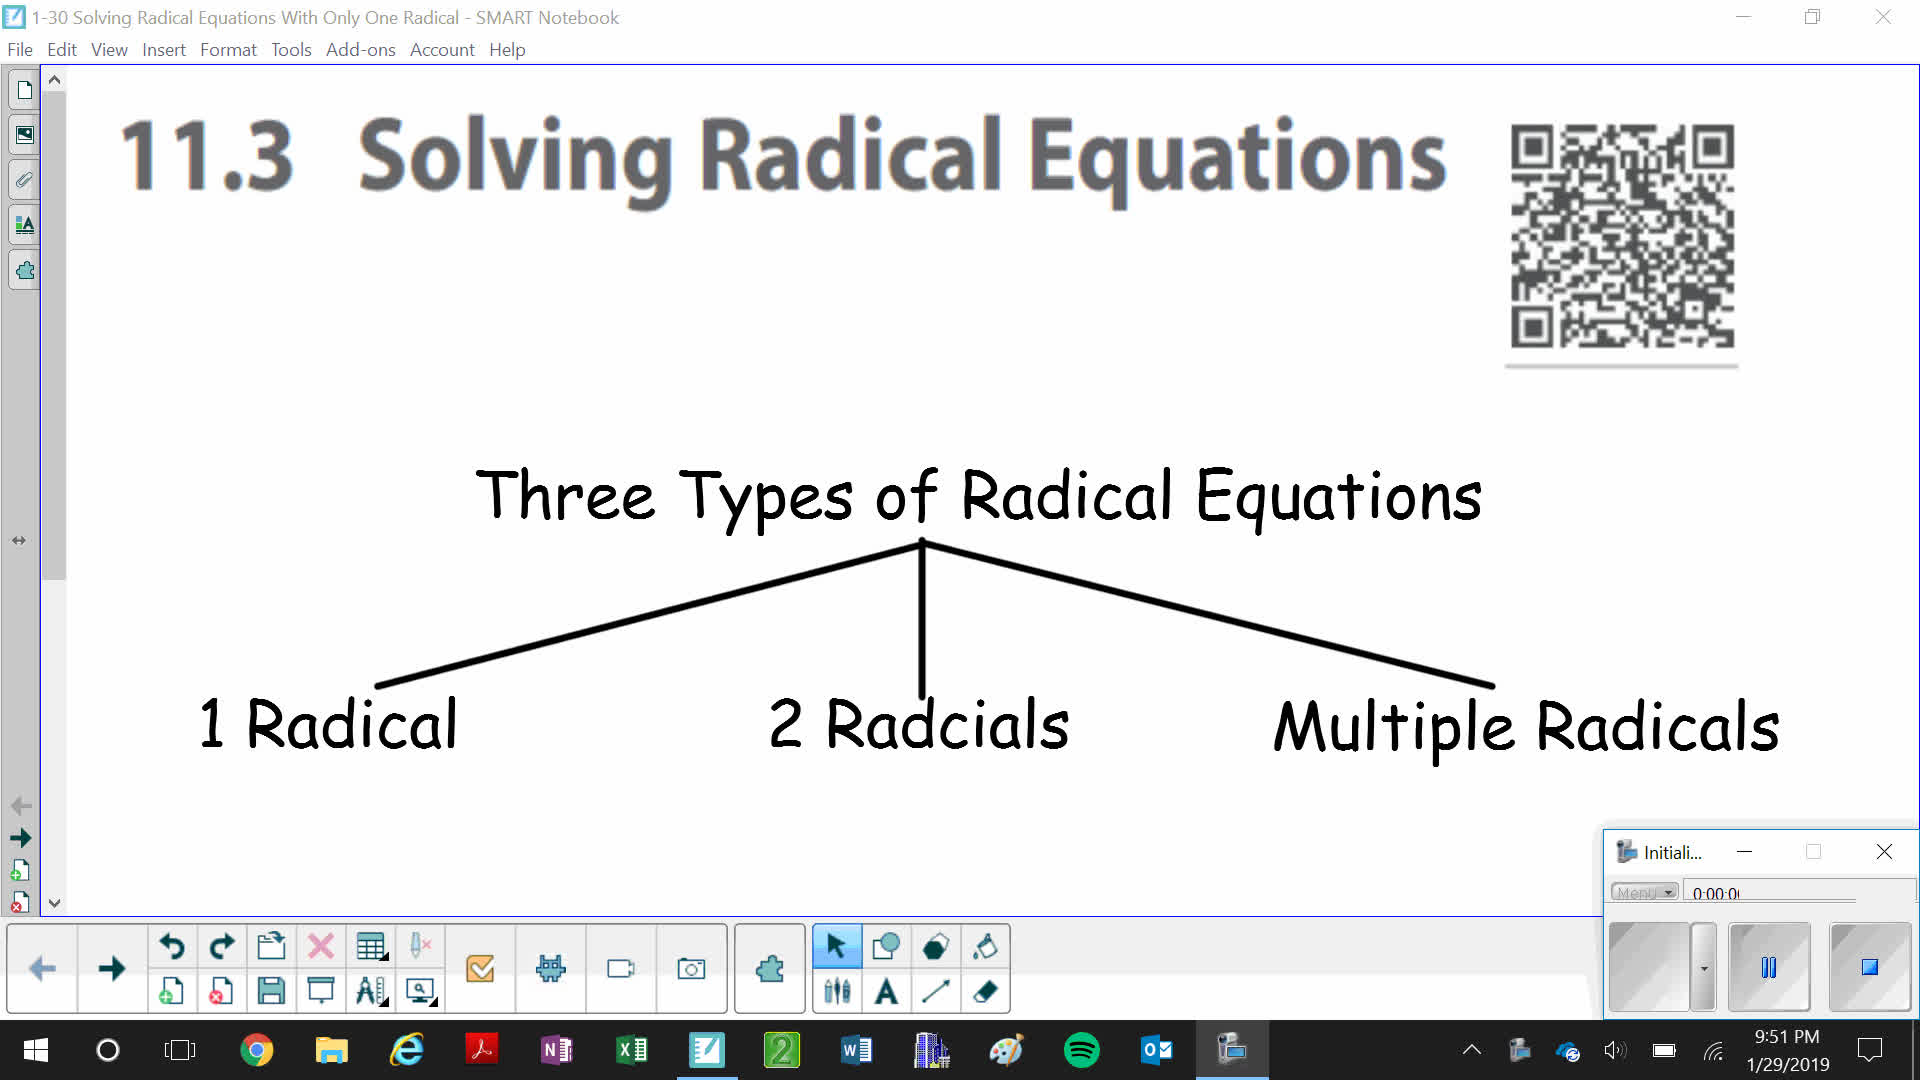 Solving Radical Equations with Only One Radical